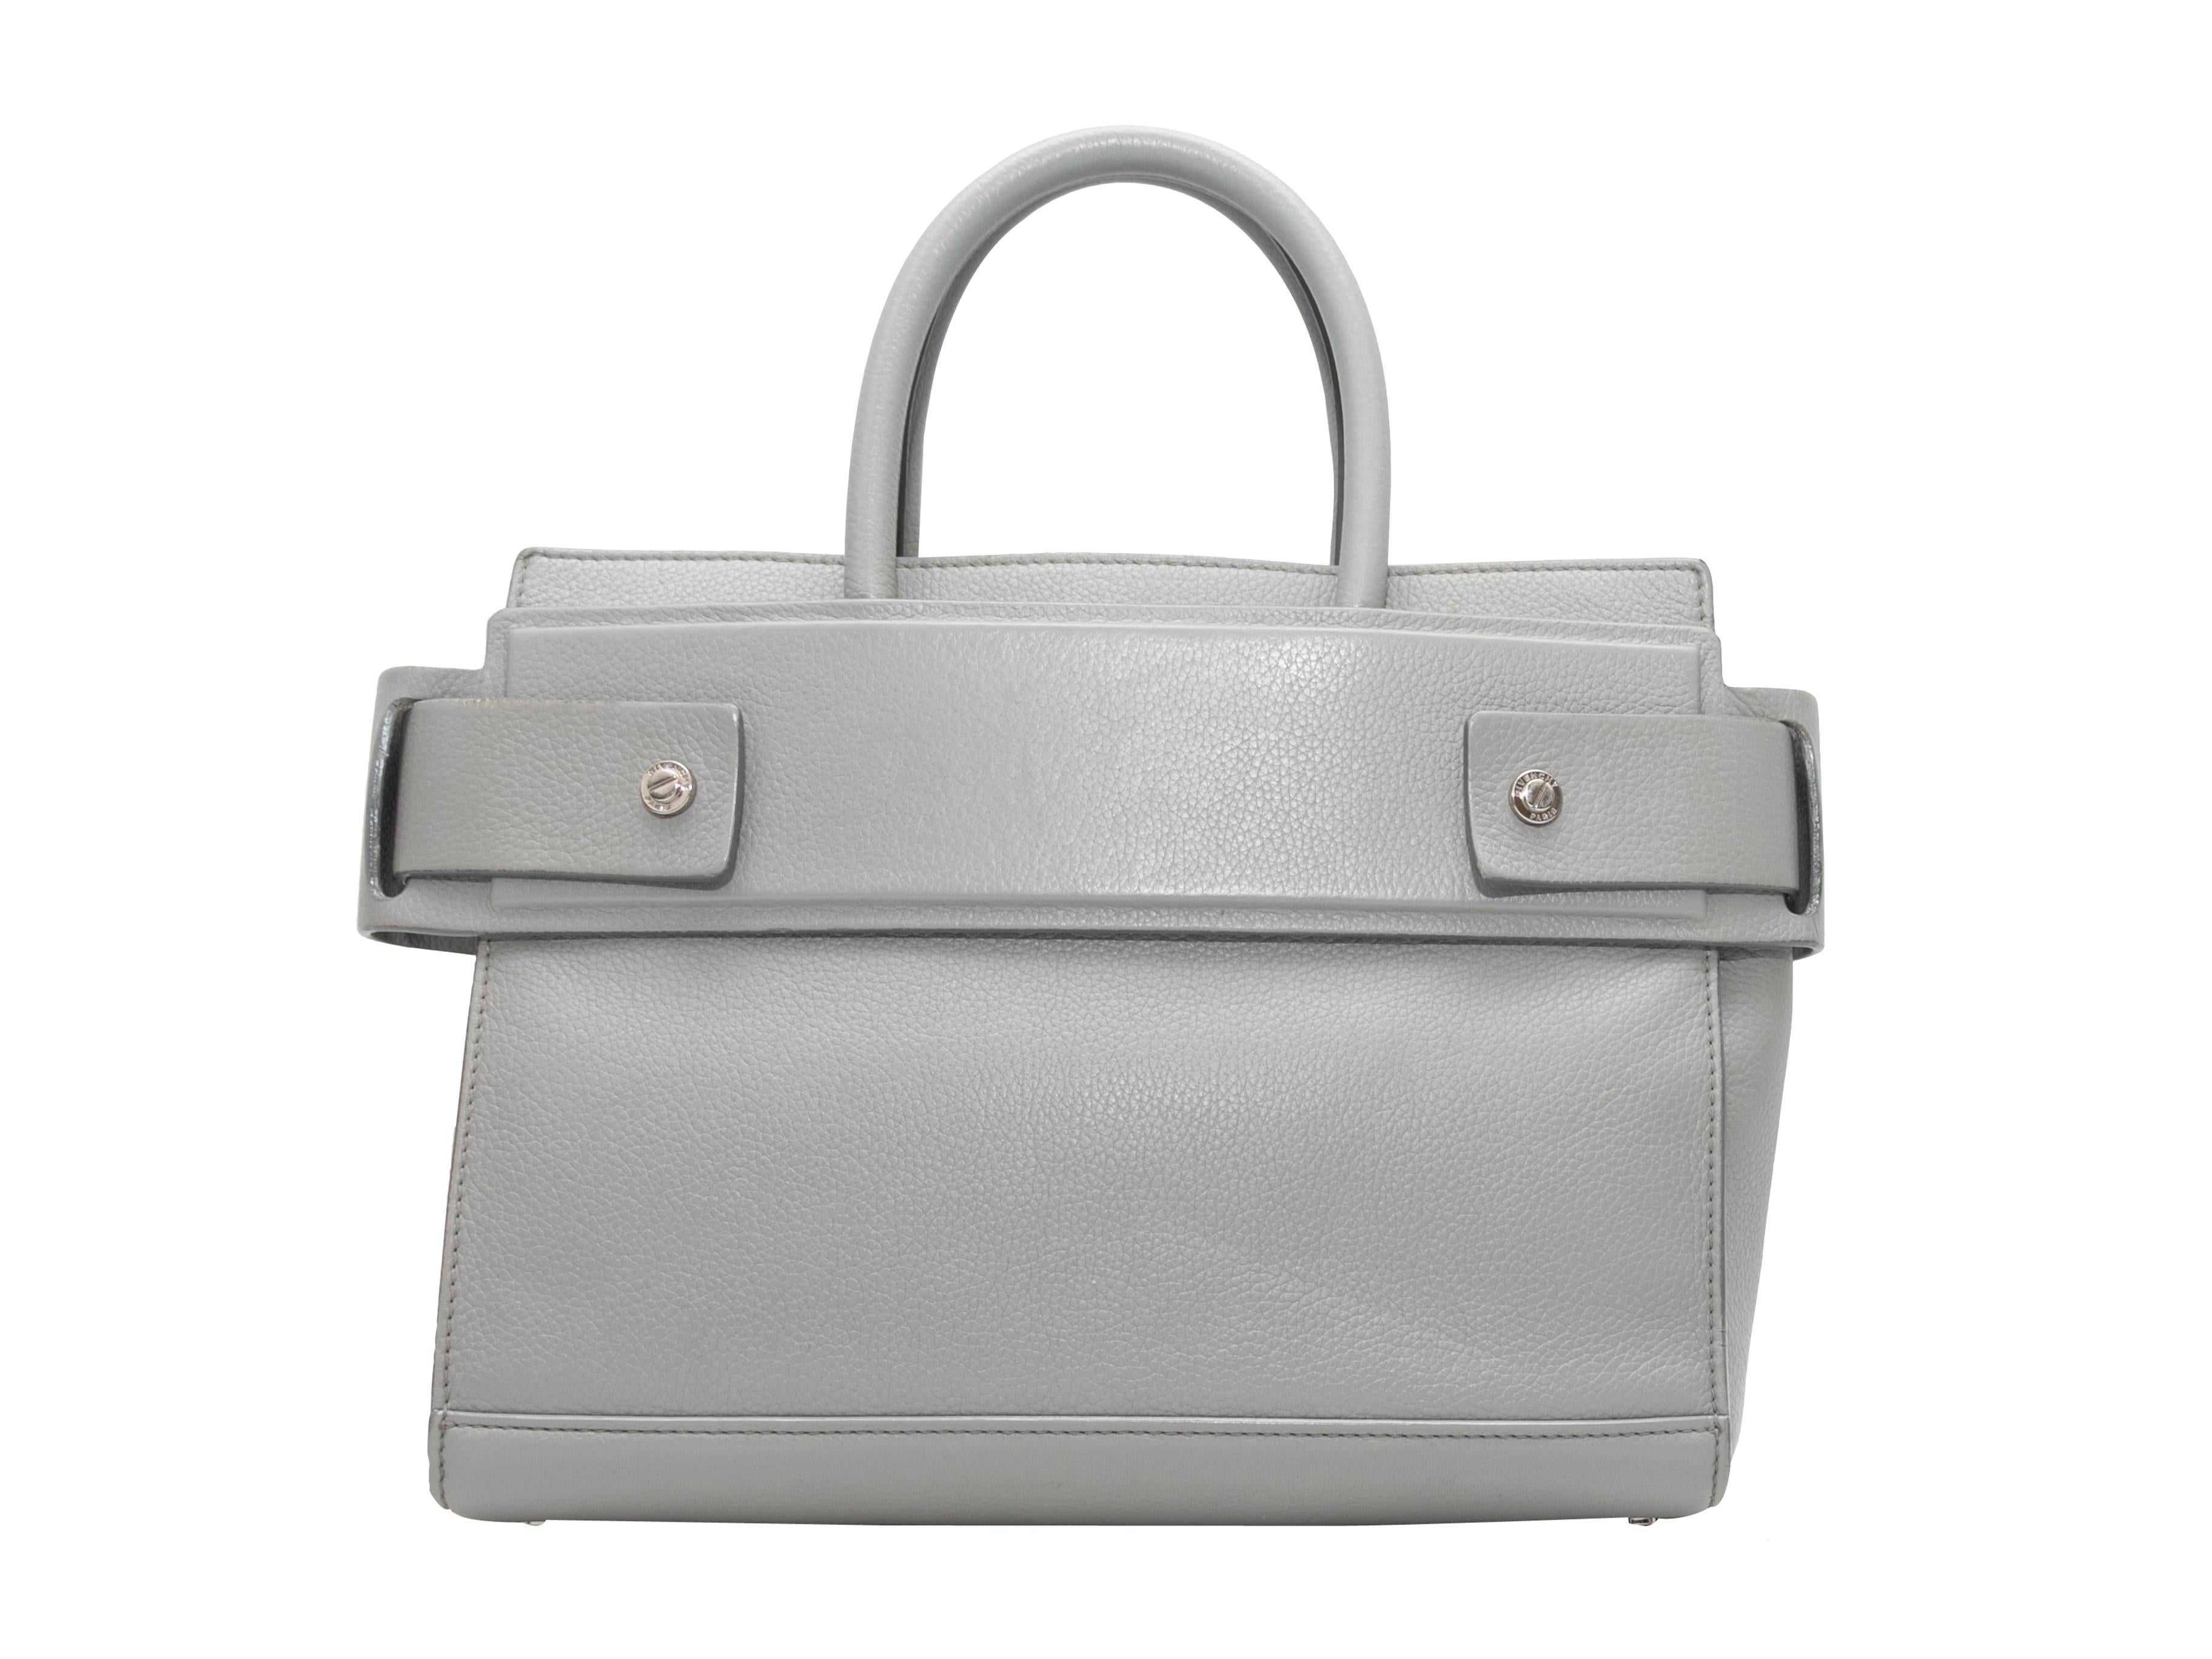 Grey Givenchy Small Horizon Satchel. The Horizon Satchel features a leather body, silver-tone hardware, dual rolled top handles, and an optional shoulder strap. 11